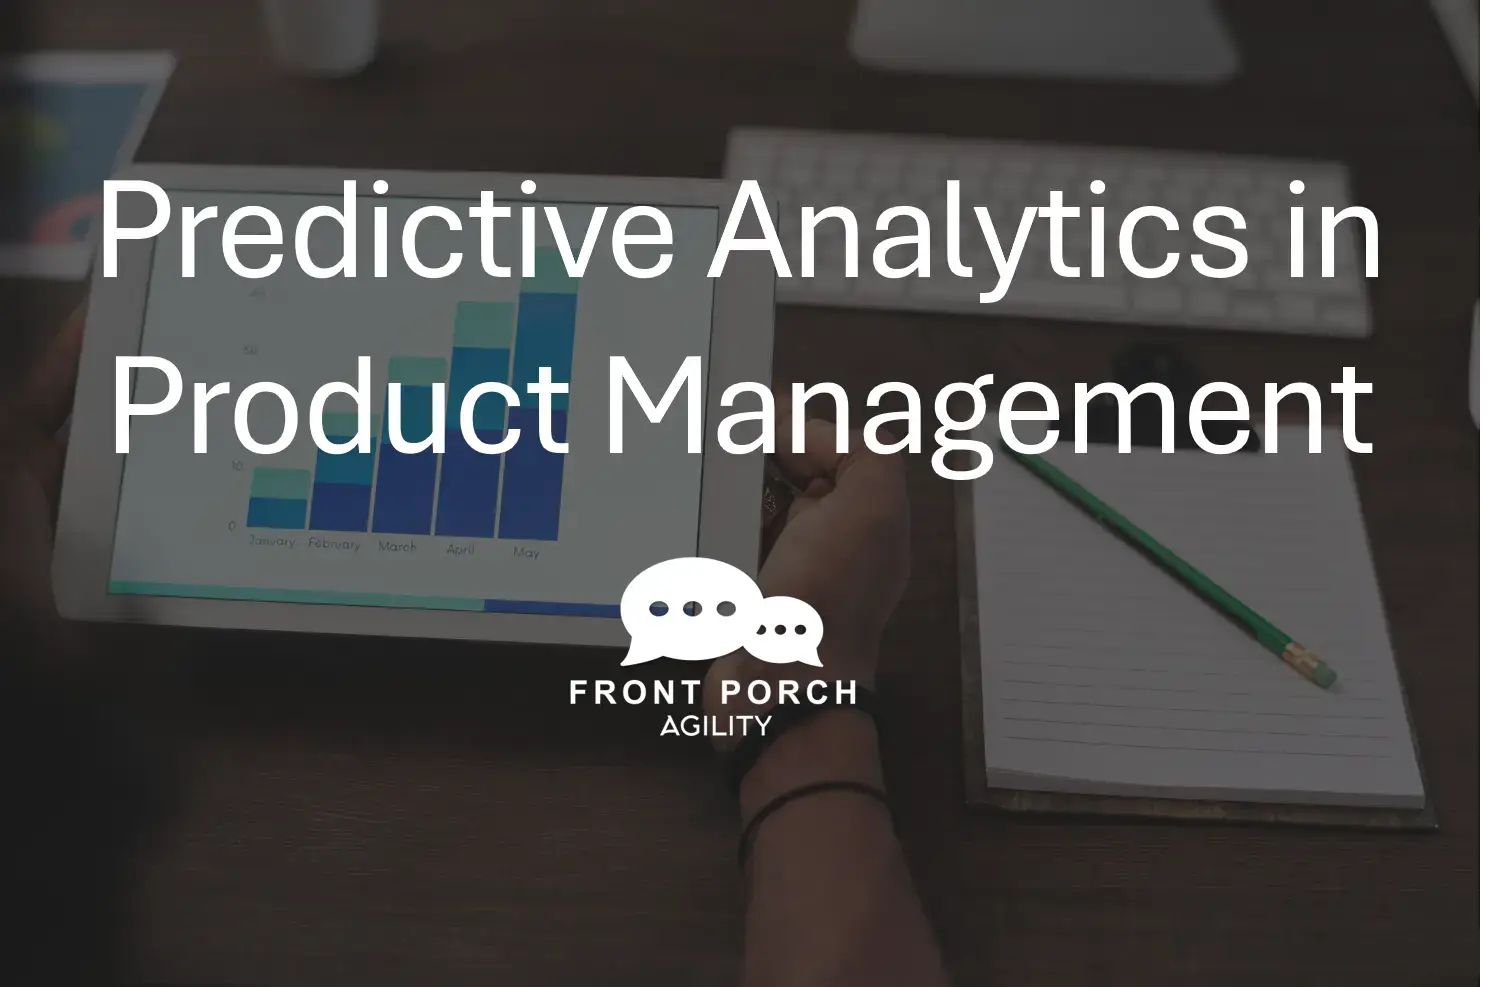 Predictive Analytics Making Products Better in Today's Market